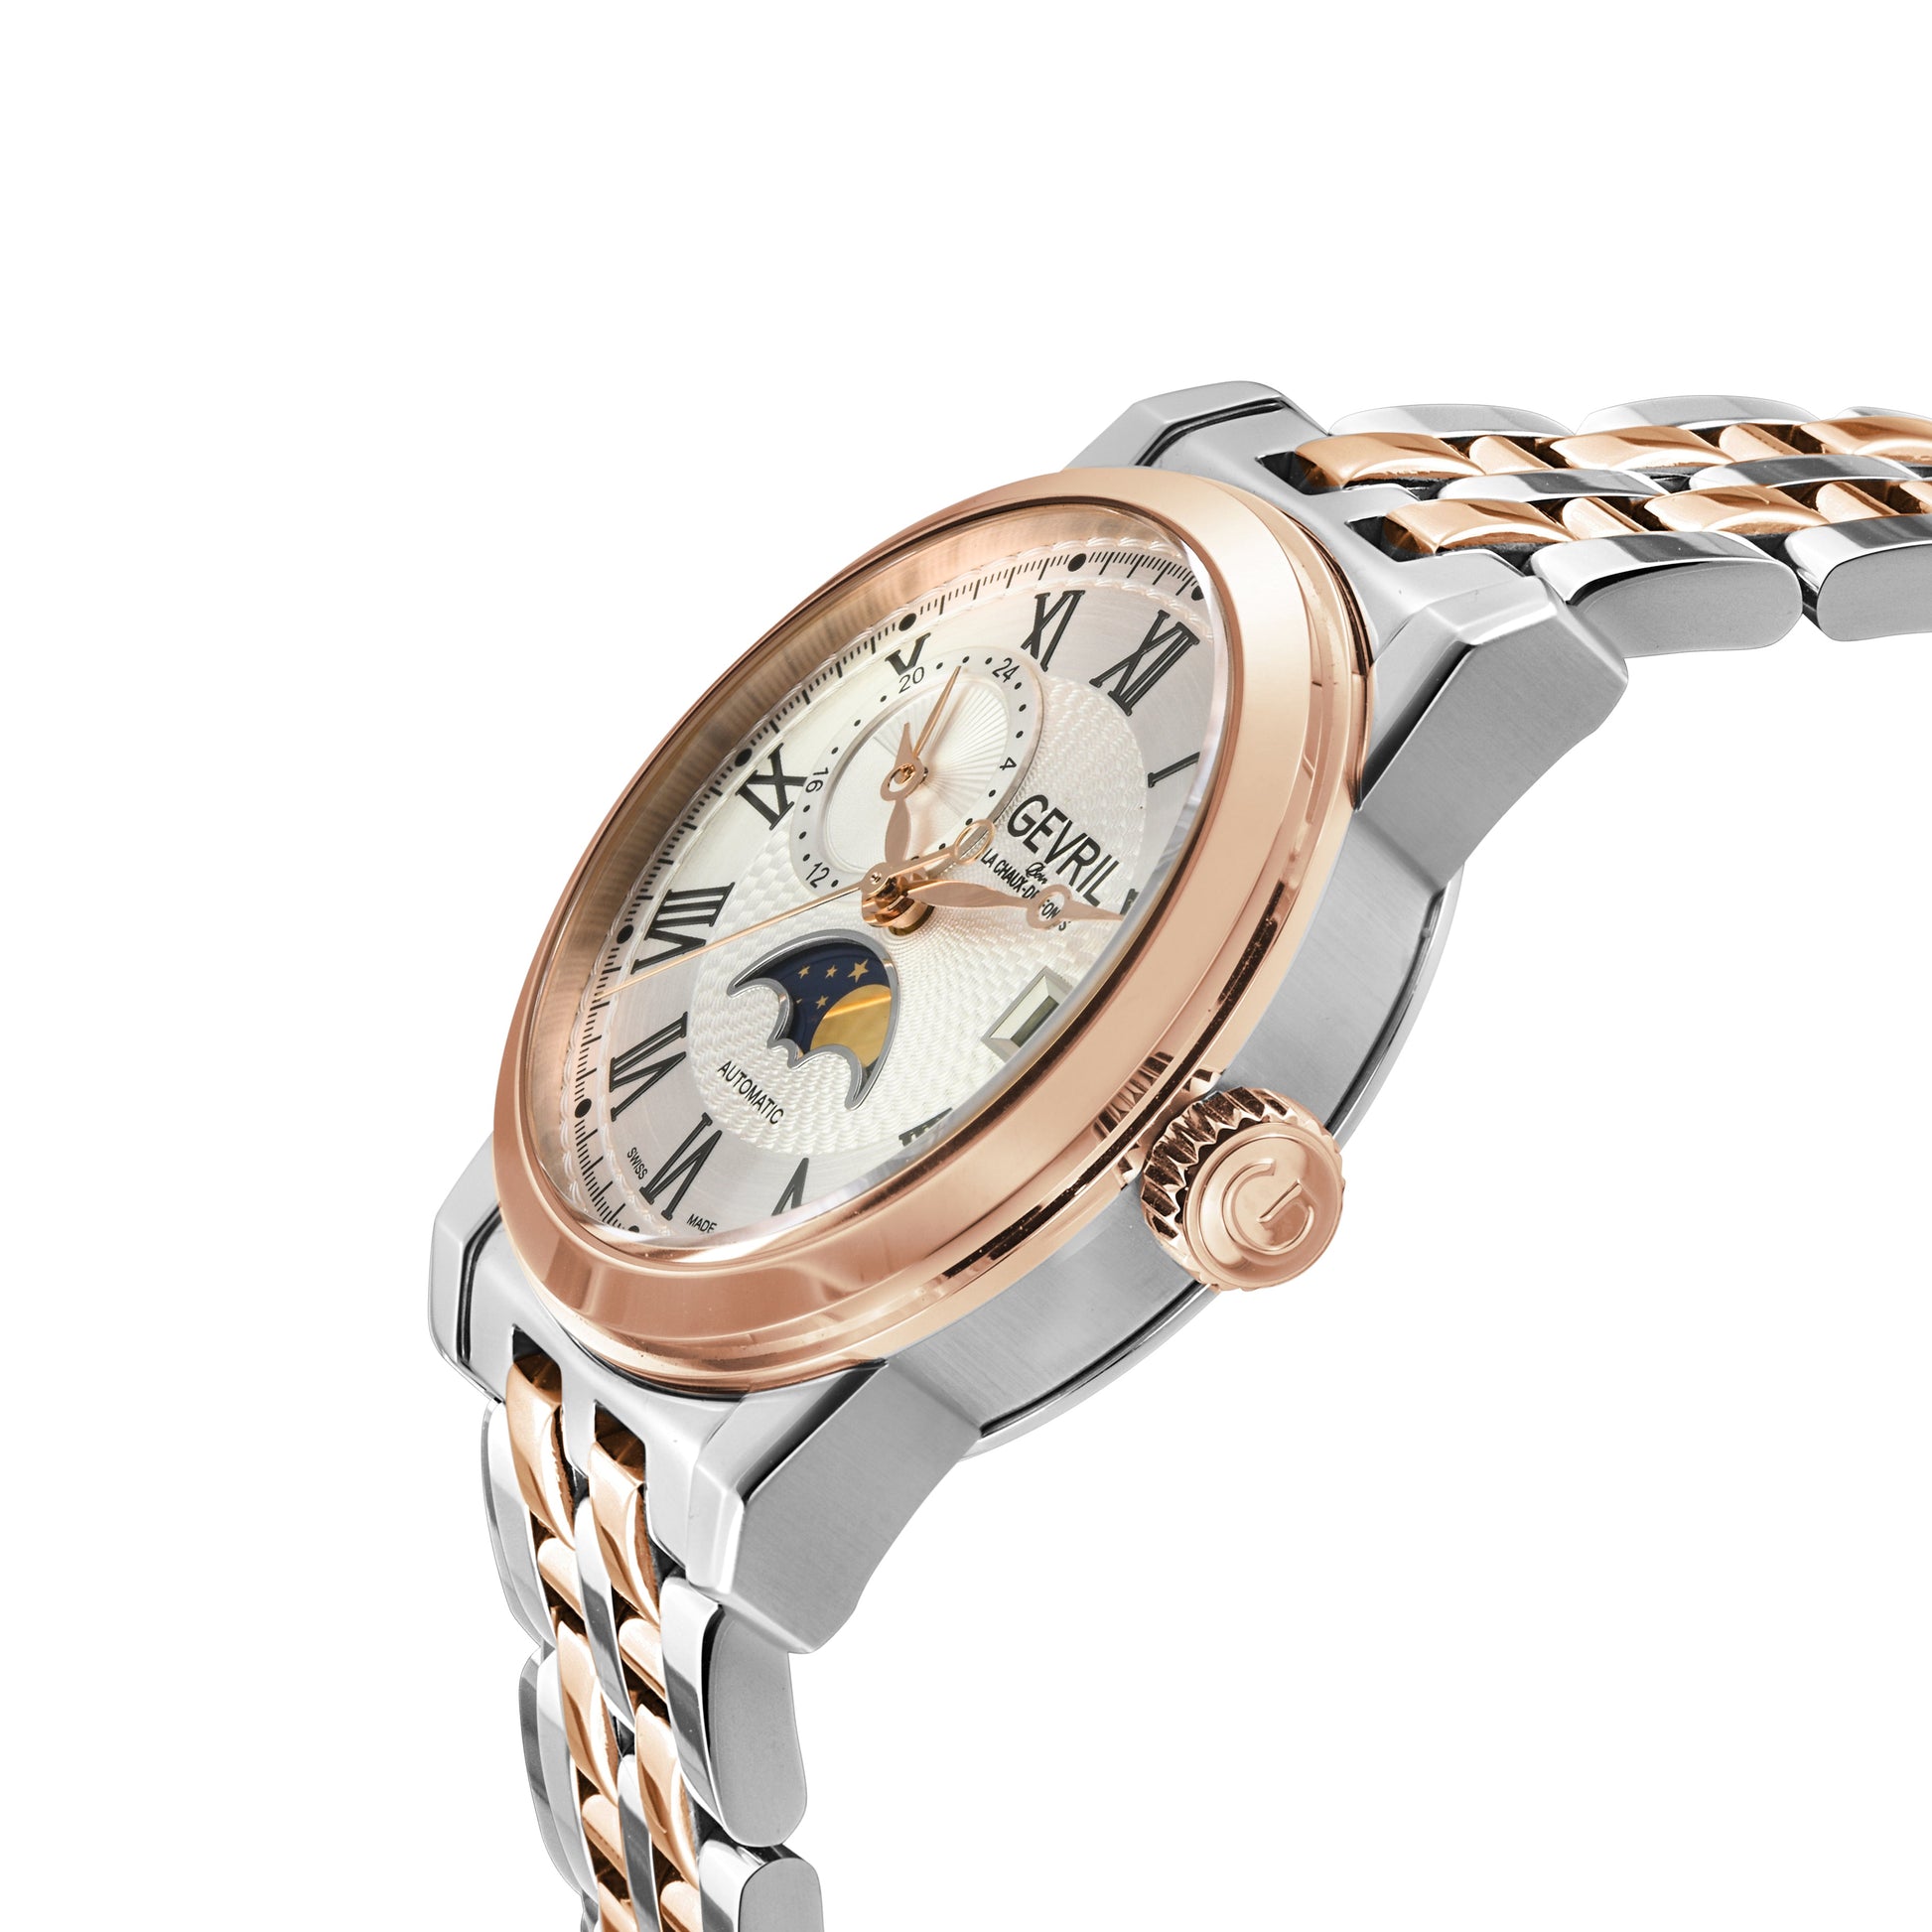 Gevril-Luxury-Swiss-Watches-Gevril Madison Swiss Automatic - Moon Phase-2593